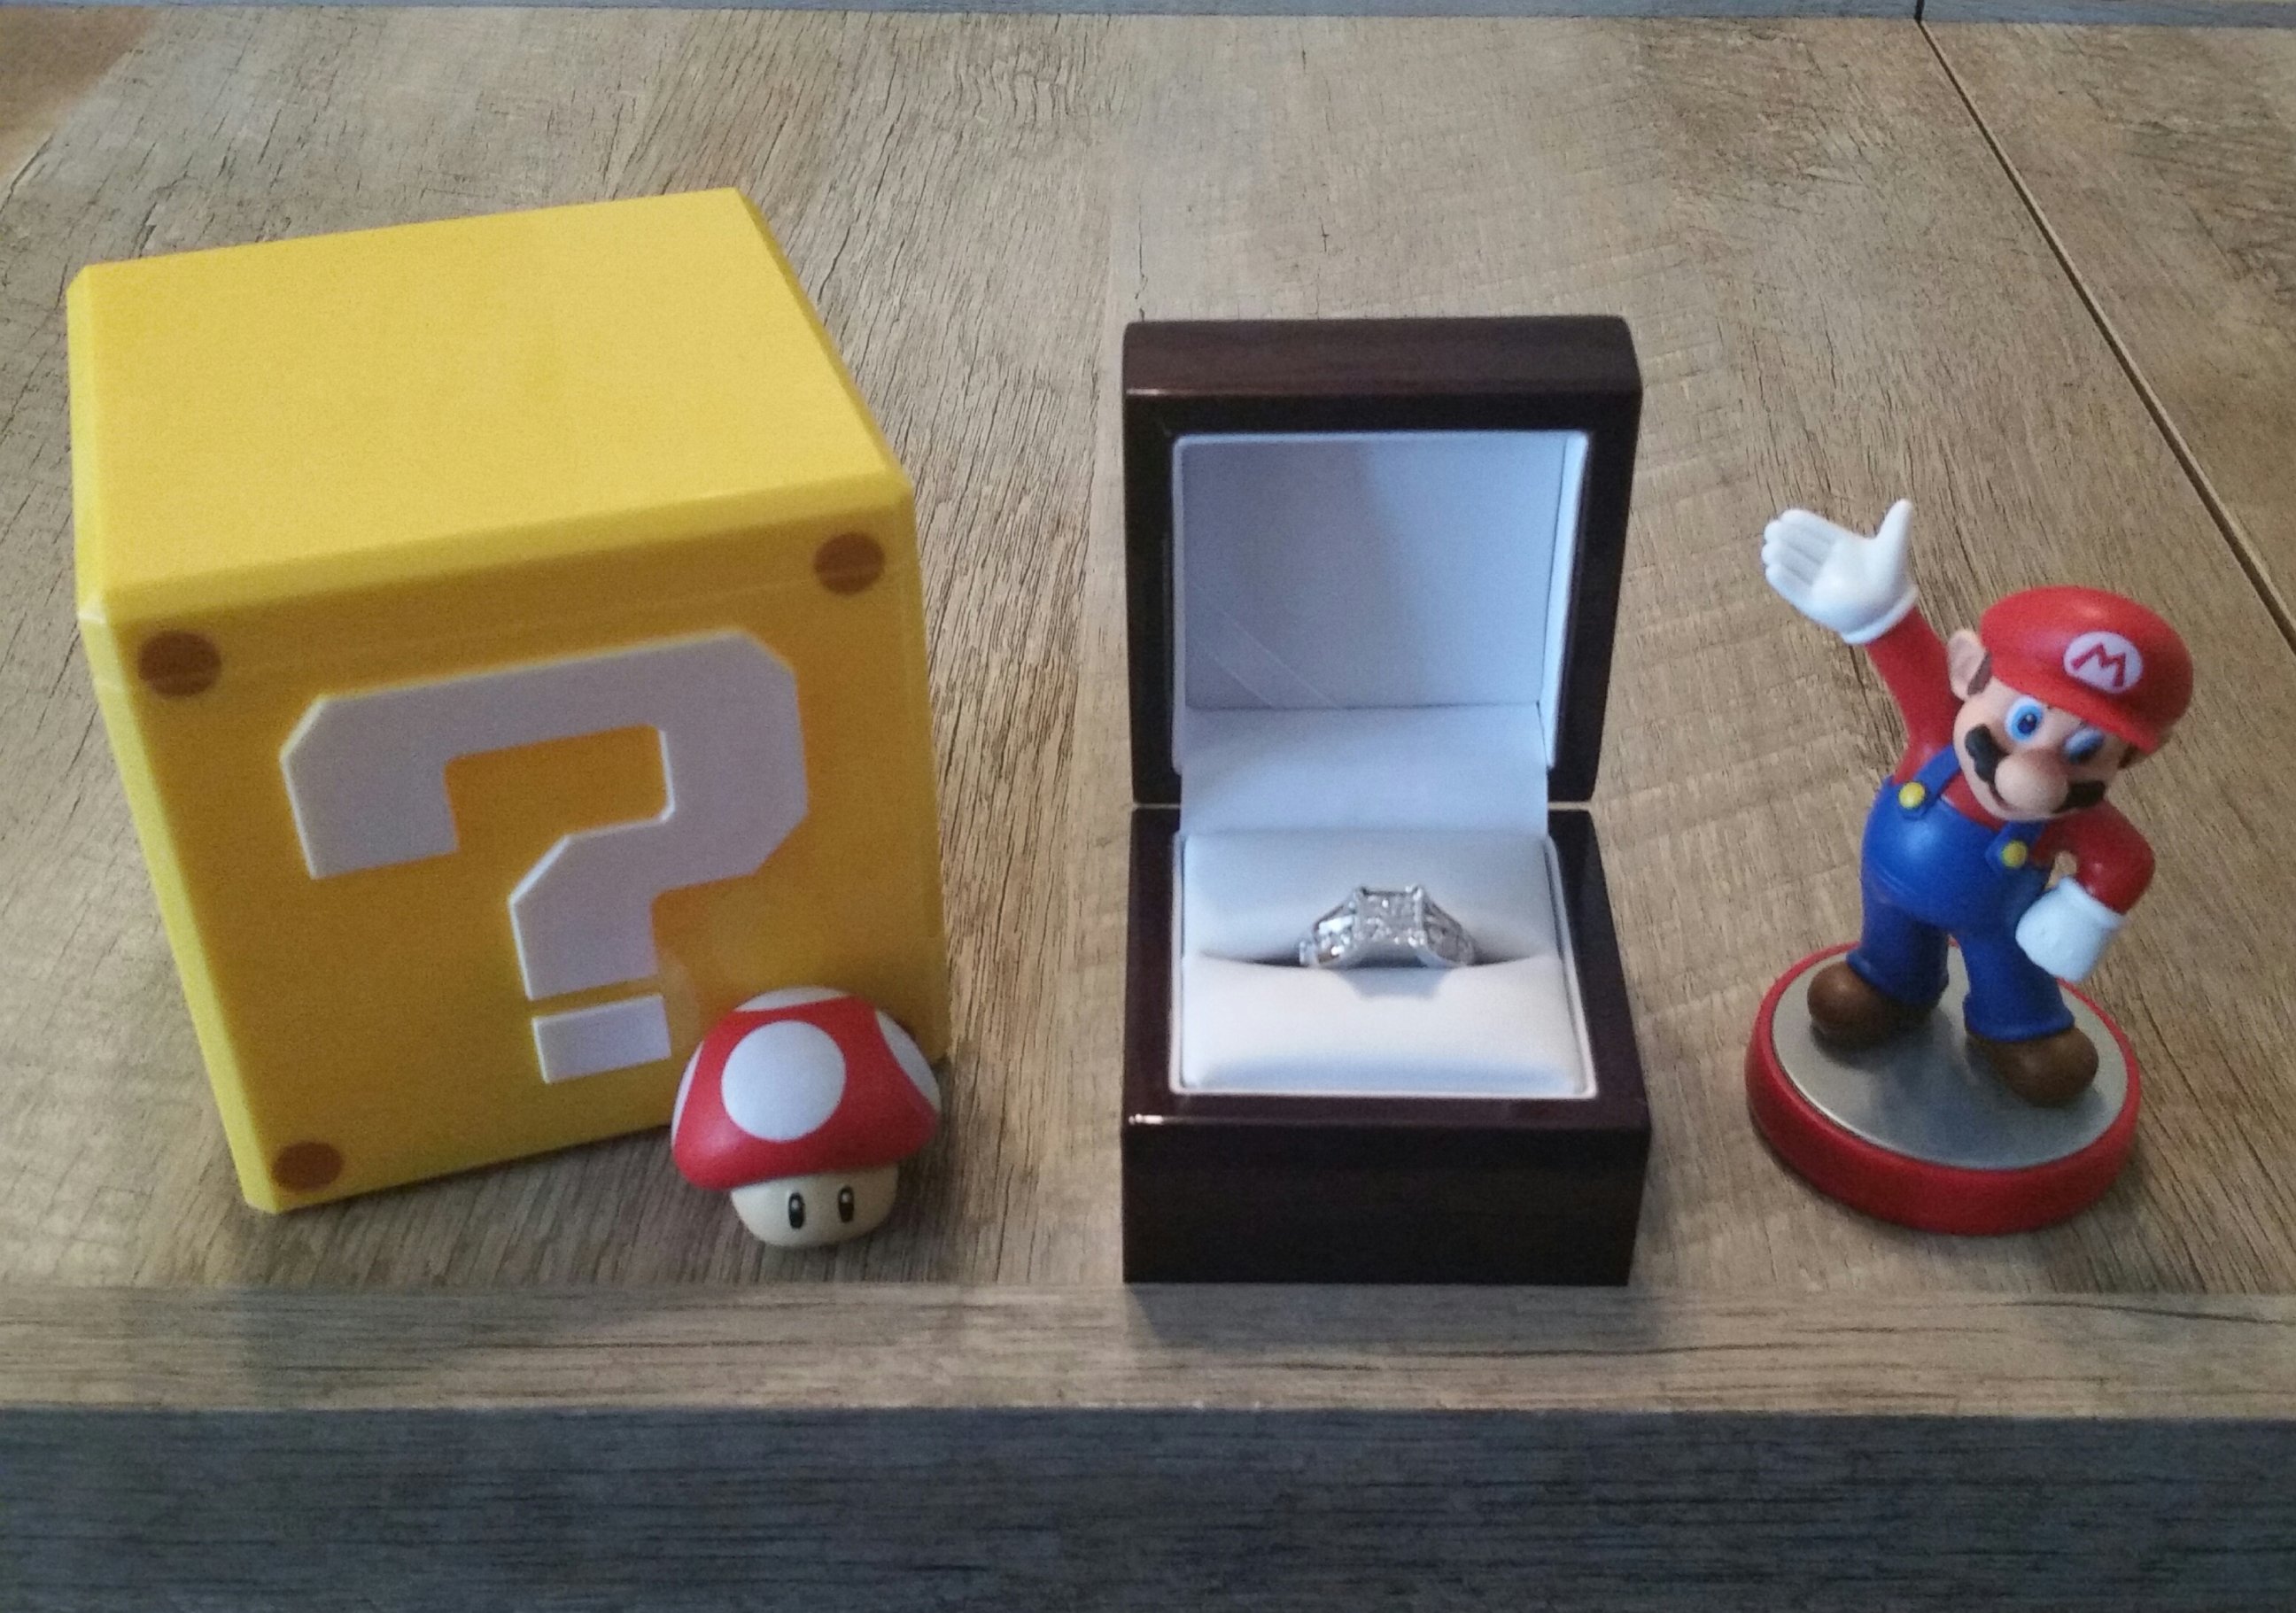 PHOTO: Man’s Creative Super Mario Proposal Gets High Score With Bride-To-Be